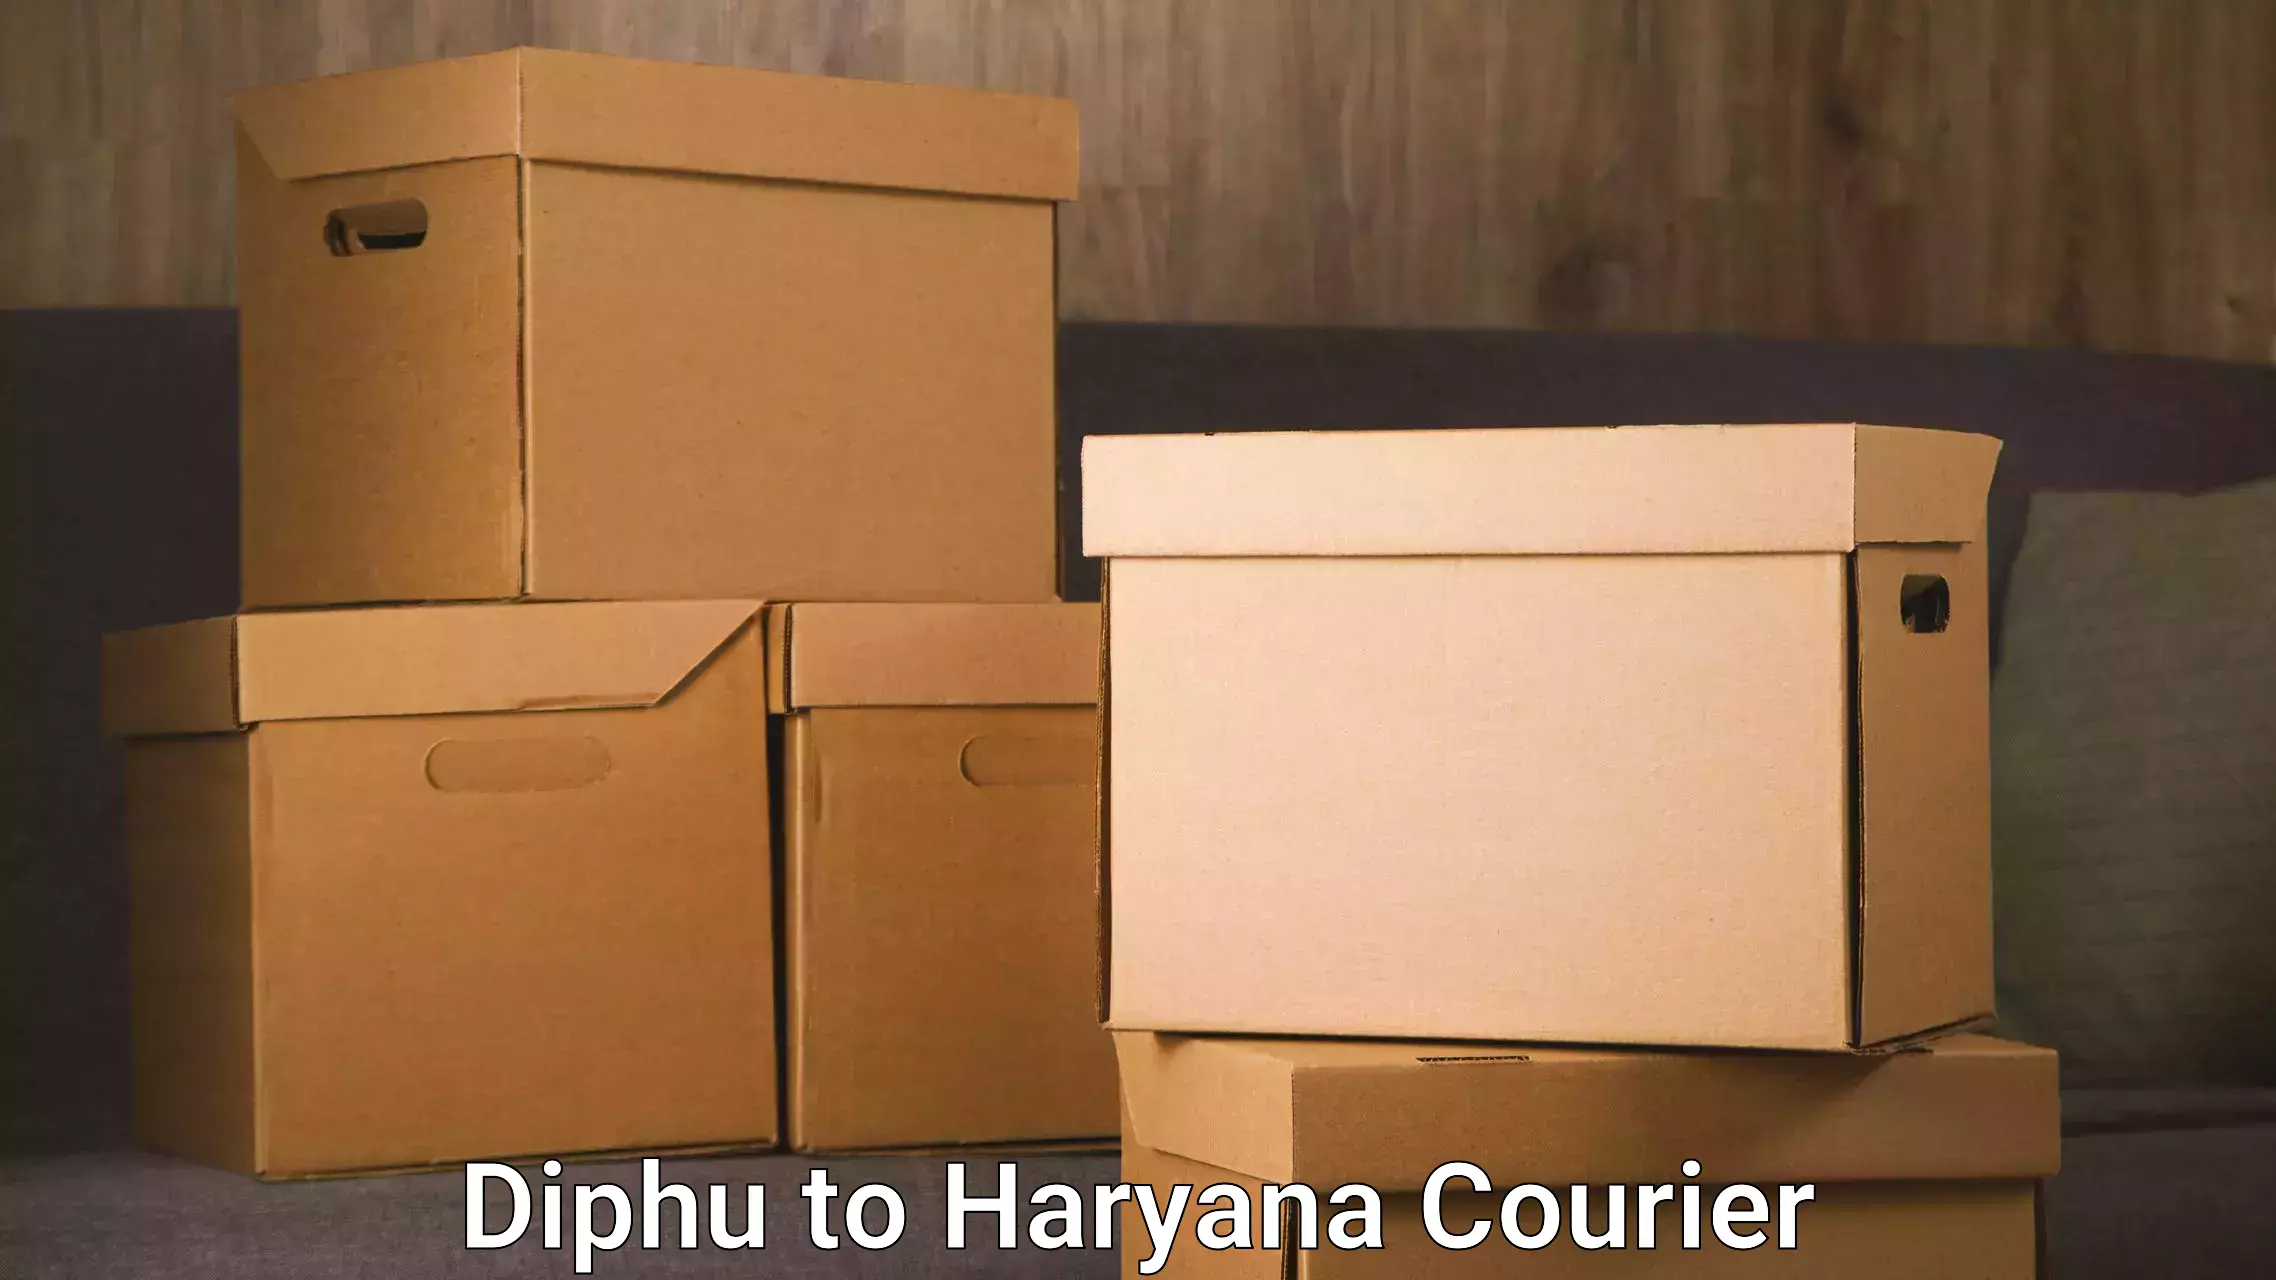 Express delivery network Diphu to Faridabad